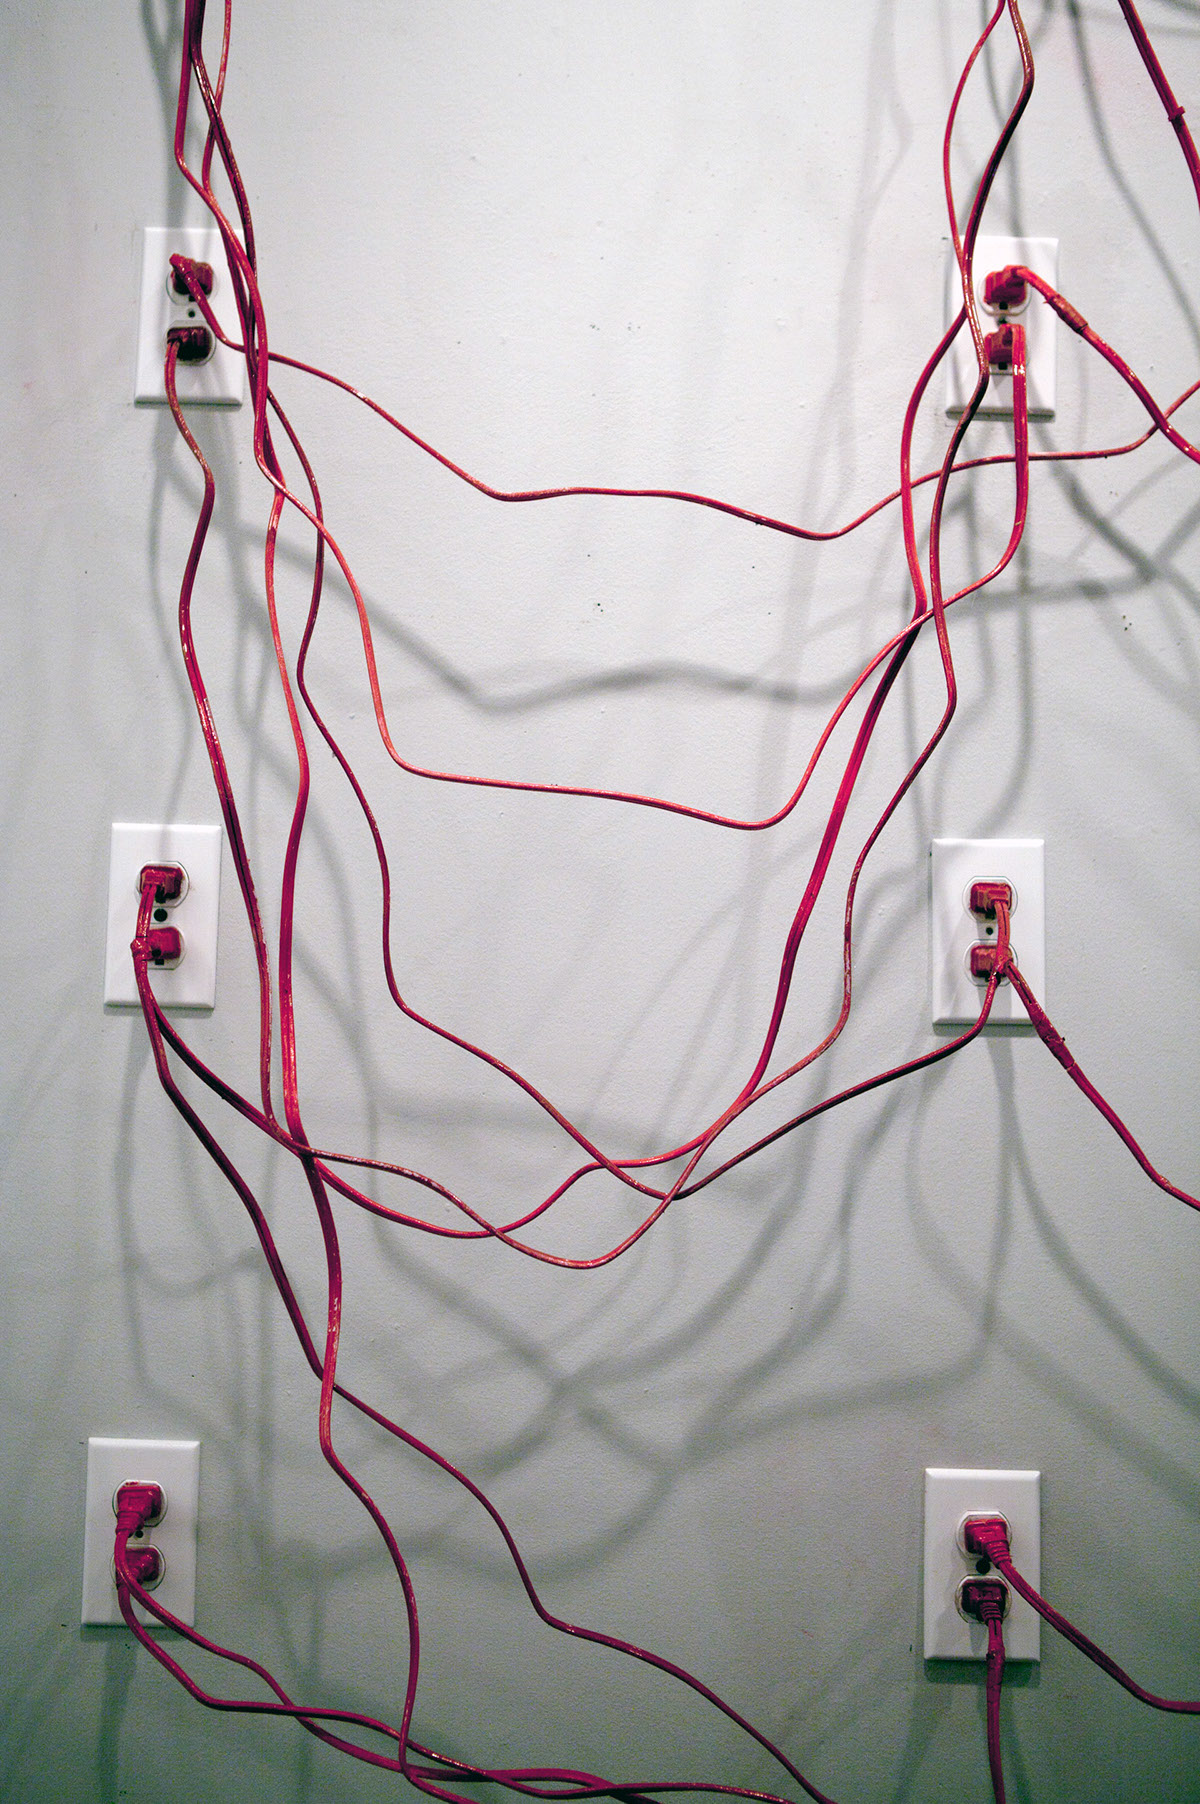 dissociation Isolation depression sculpture Installation Art cords red outlets Plug wire wall multiples alone Disconnection